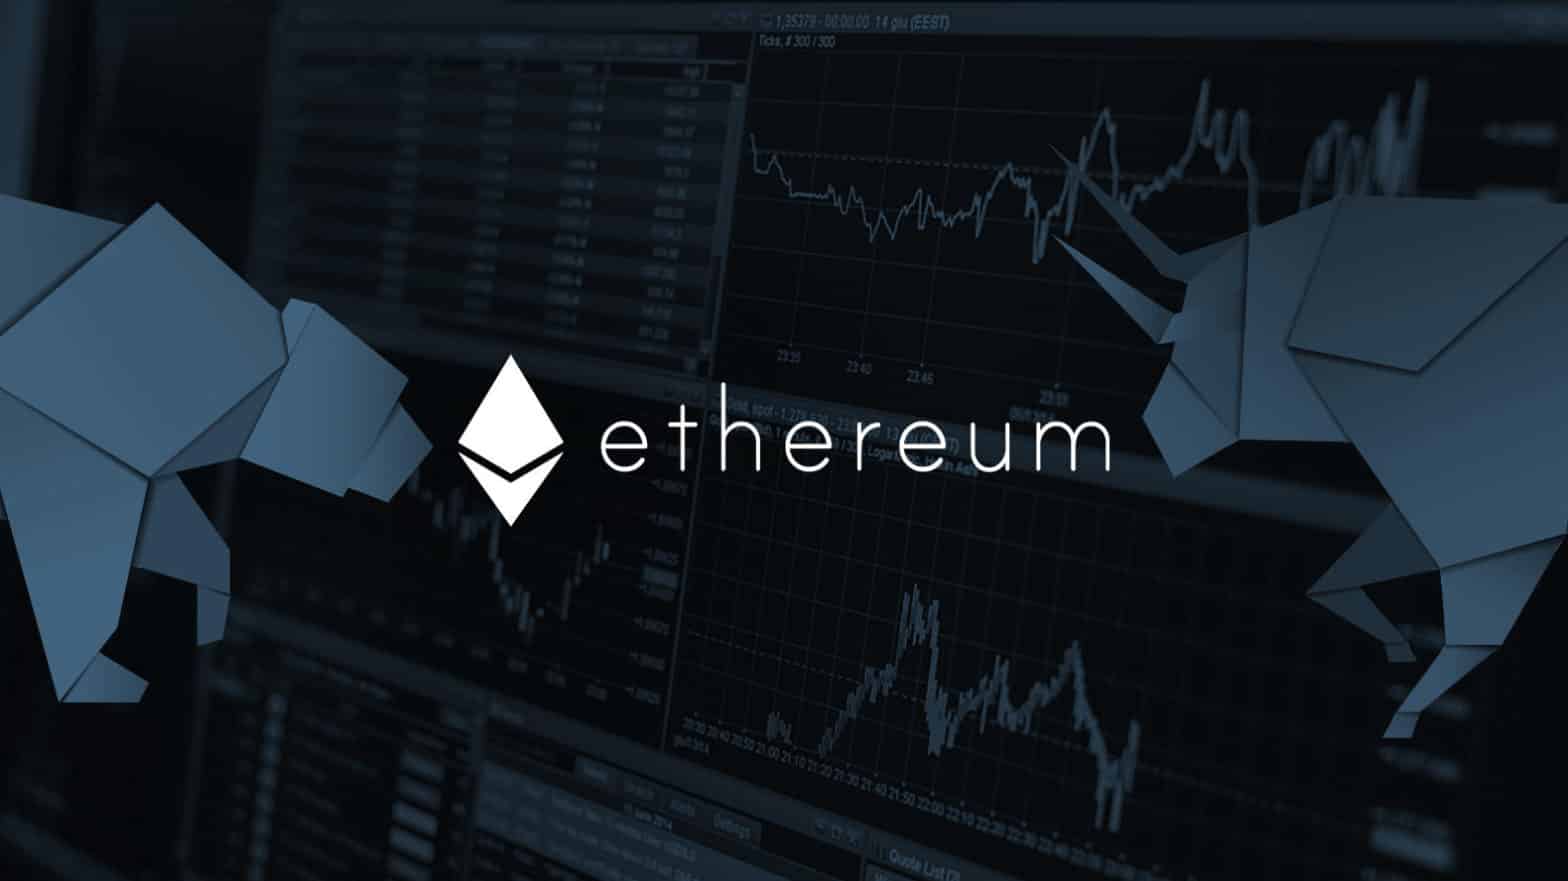  Will Ethereum (ETH) Be Able to Take A Giant Leap Towards A Bullish Future?